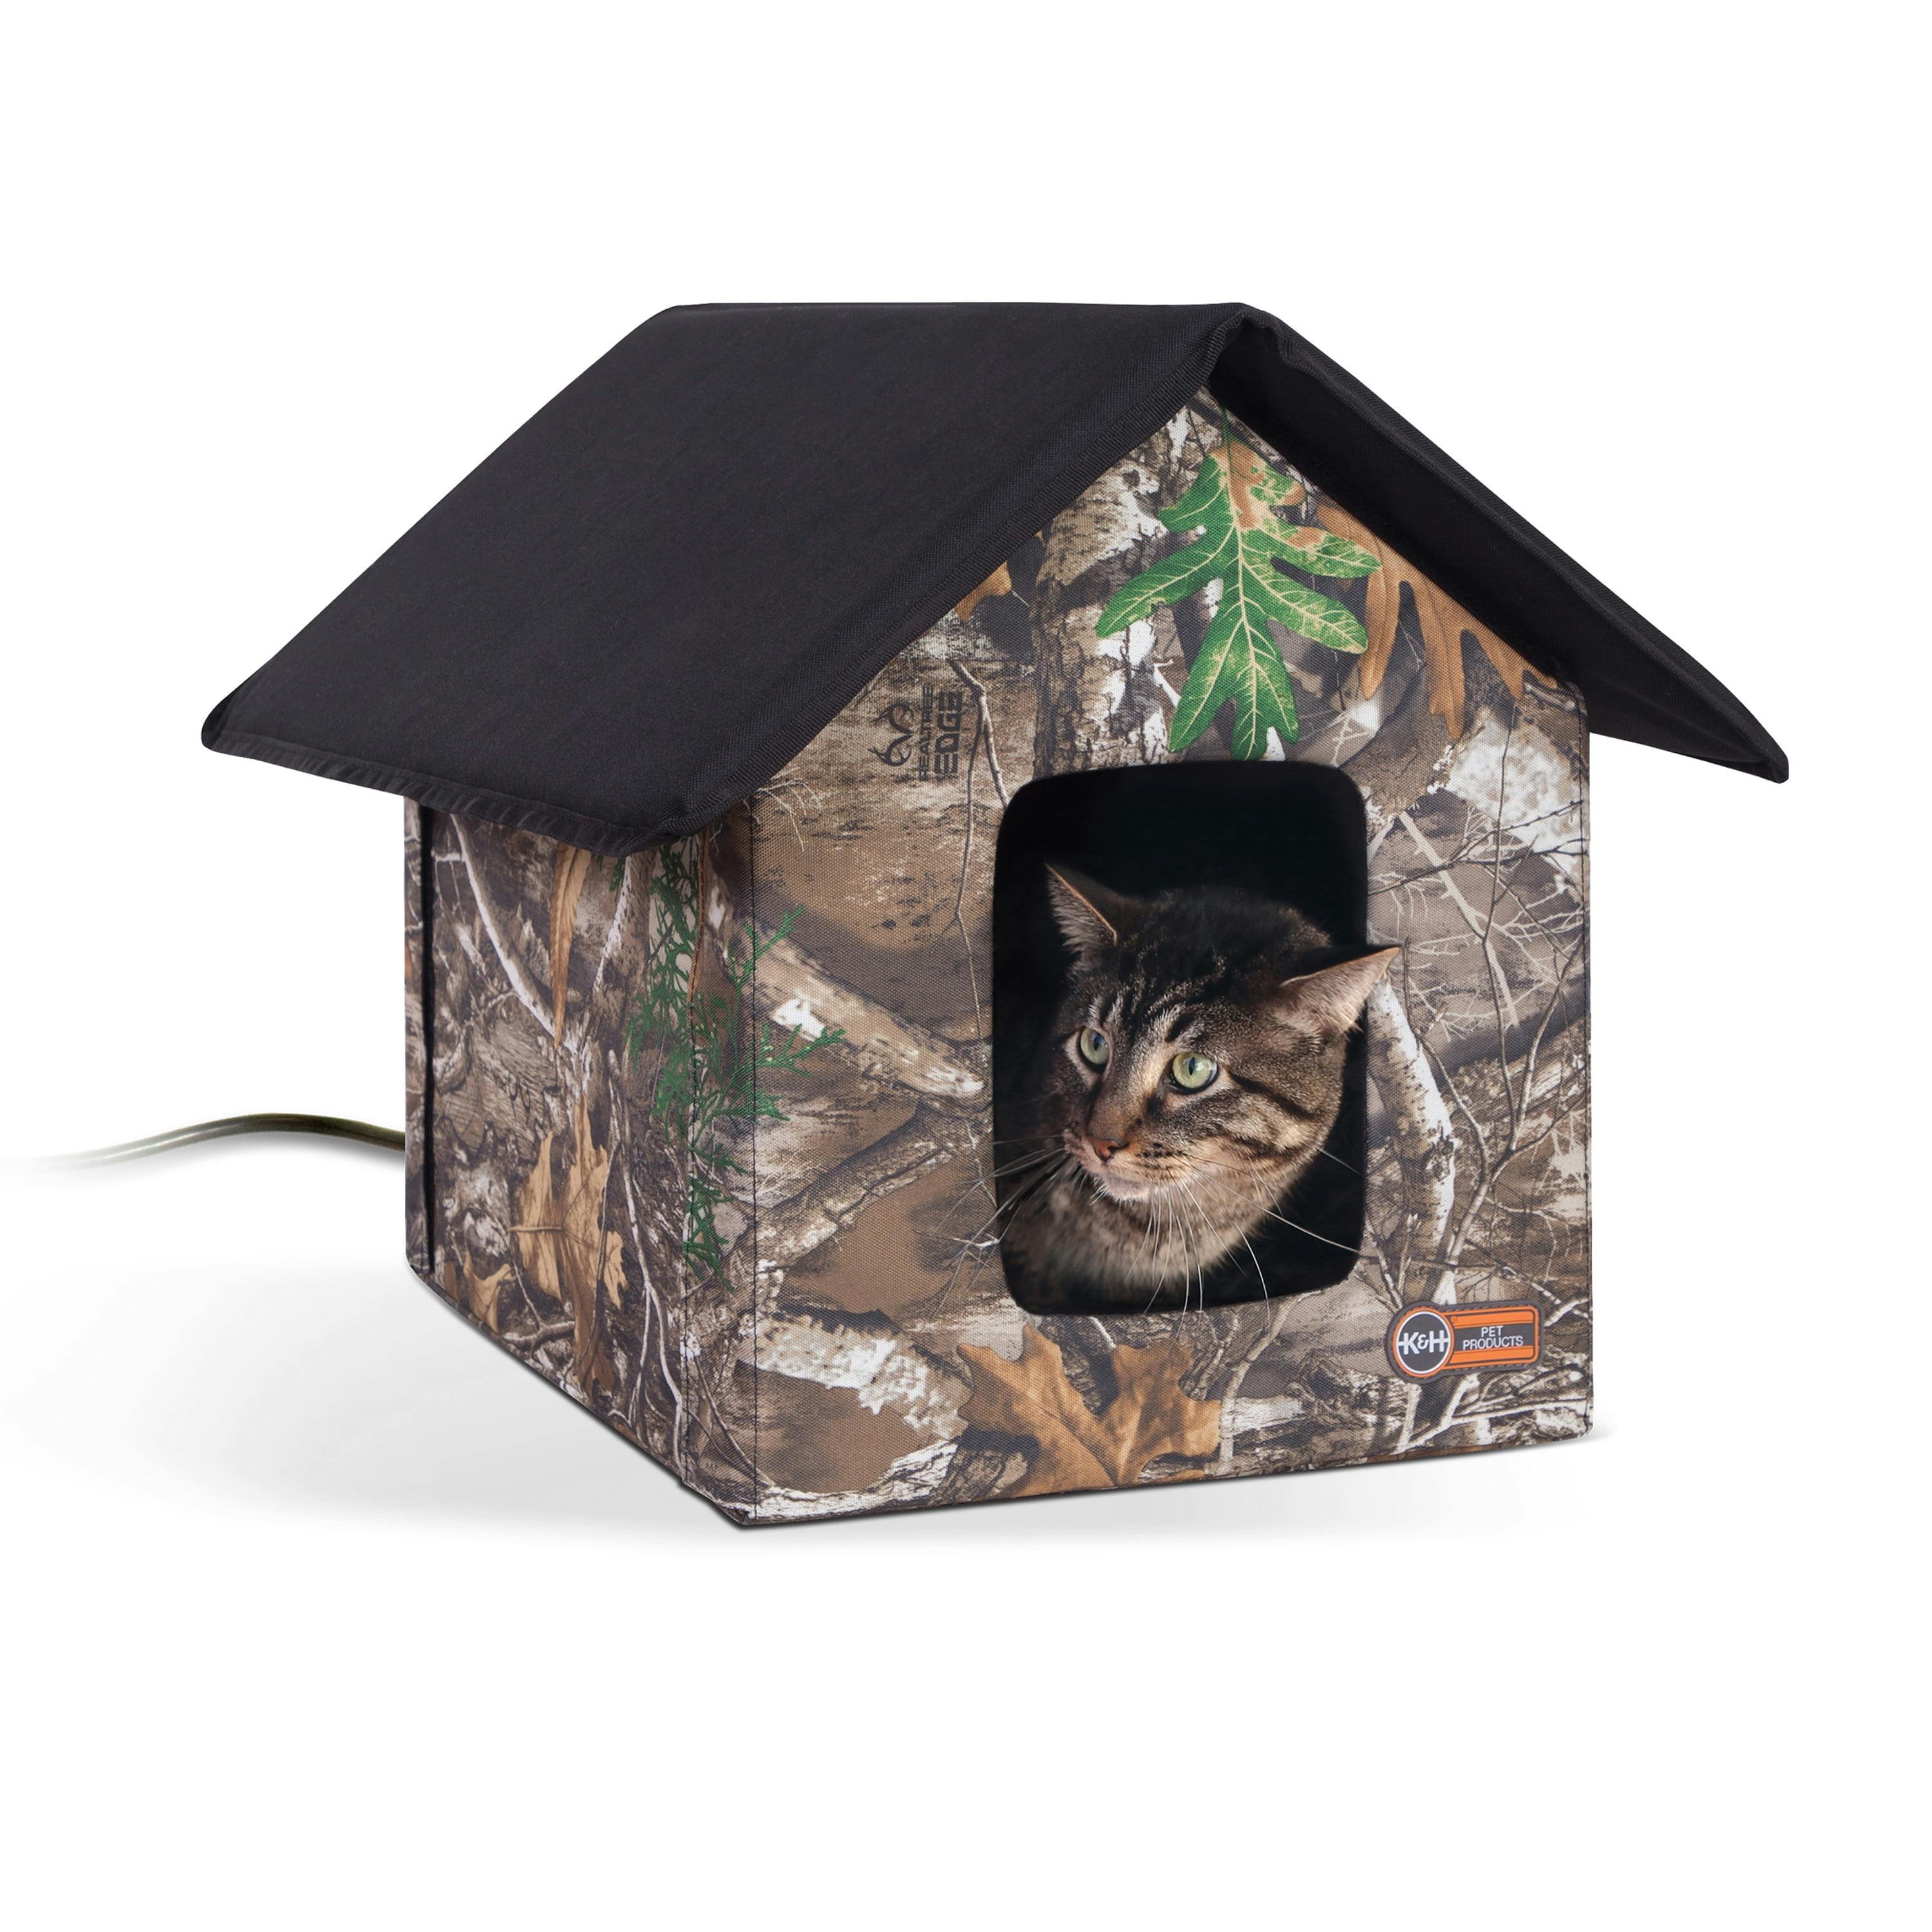 Cozy Camo Outdoor Heated Cat Shelter with Vinyl Backing